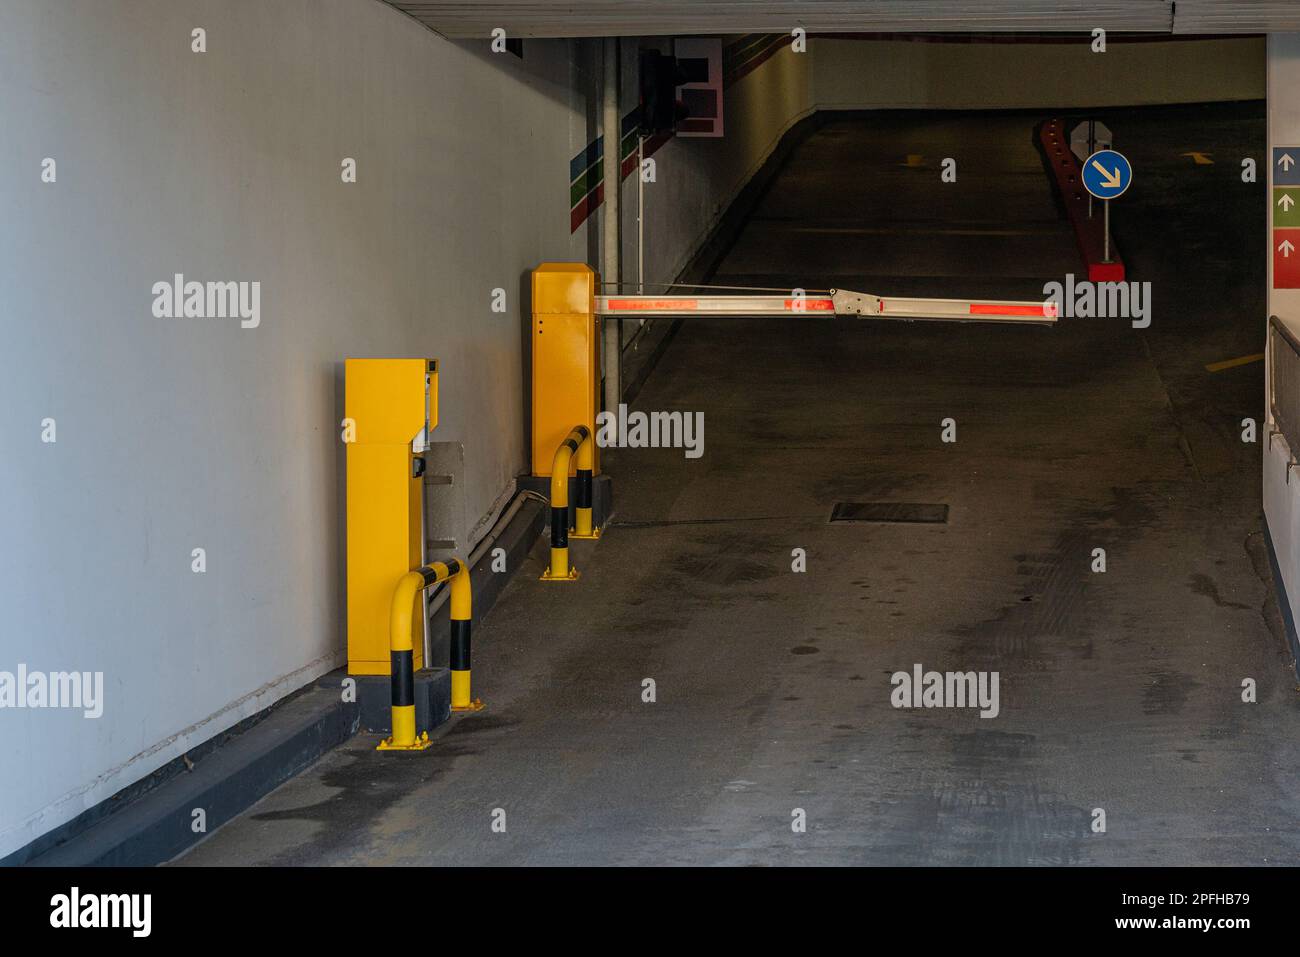 Entrance to a paid garage closed by a barrier. Stock Photo